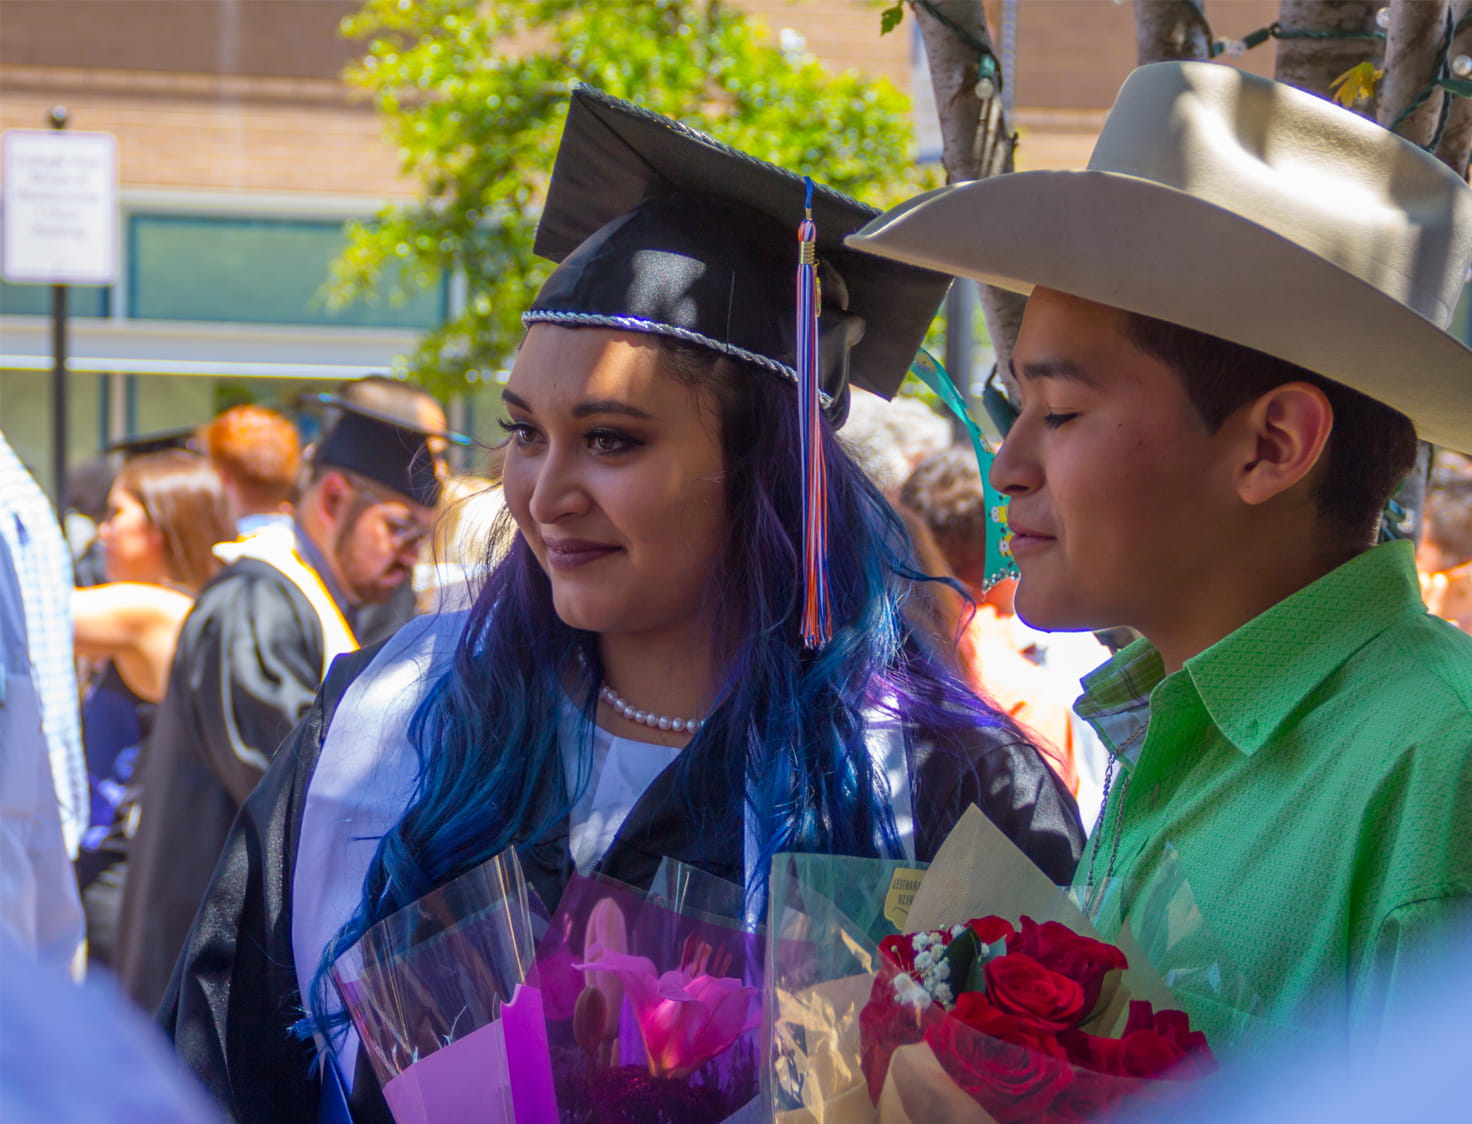 Woman with purple and blue hair in a graduation cap and gown posing with a boy in a cowboy hat.